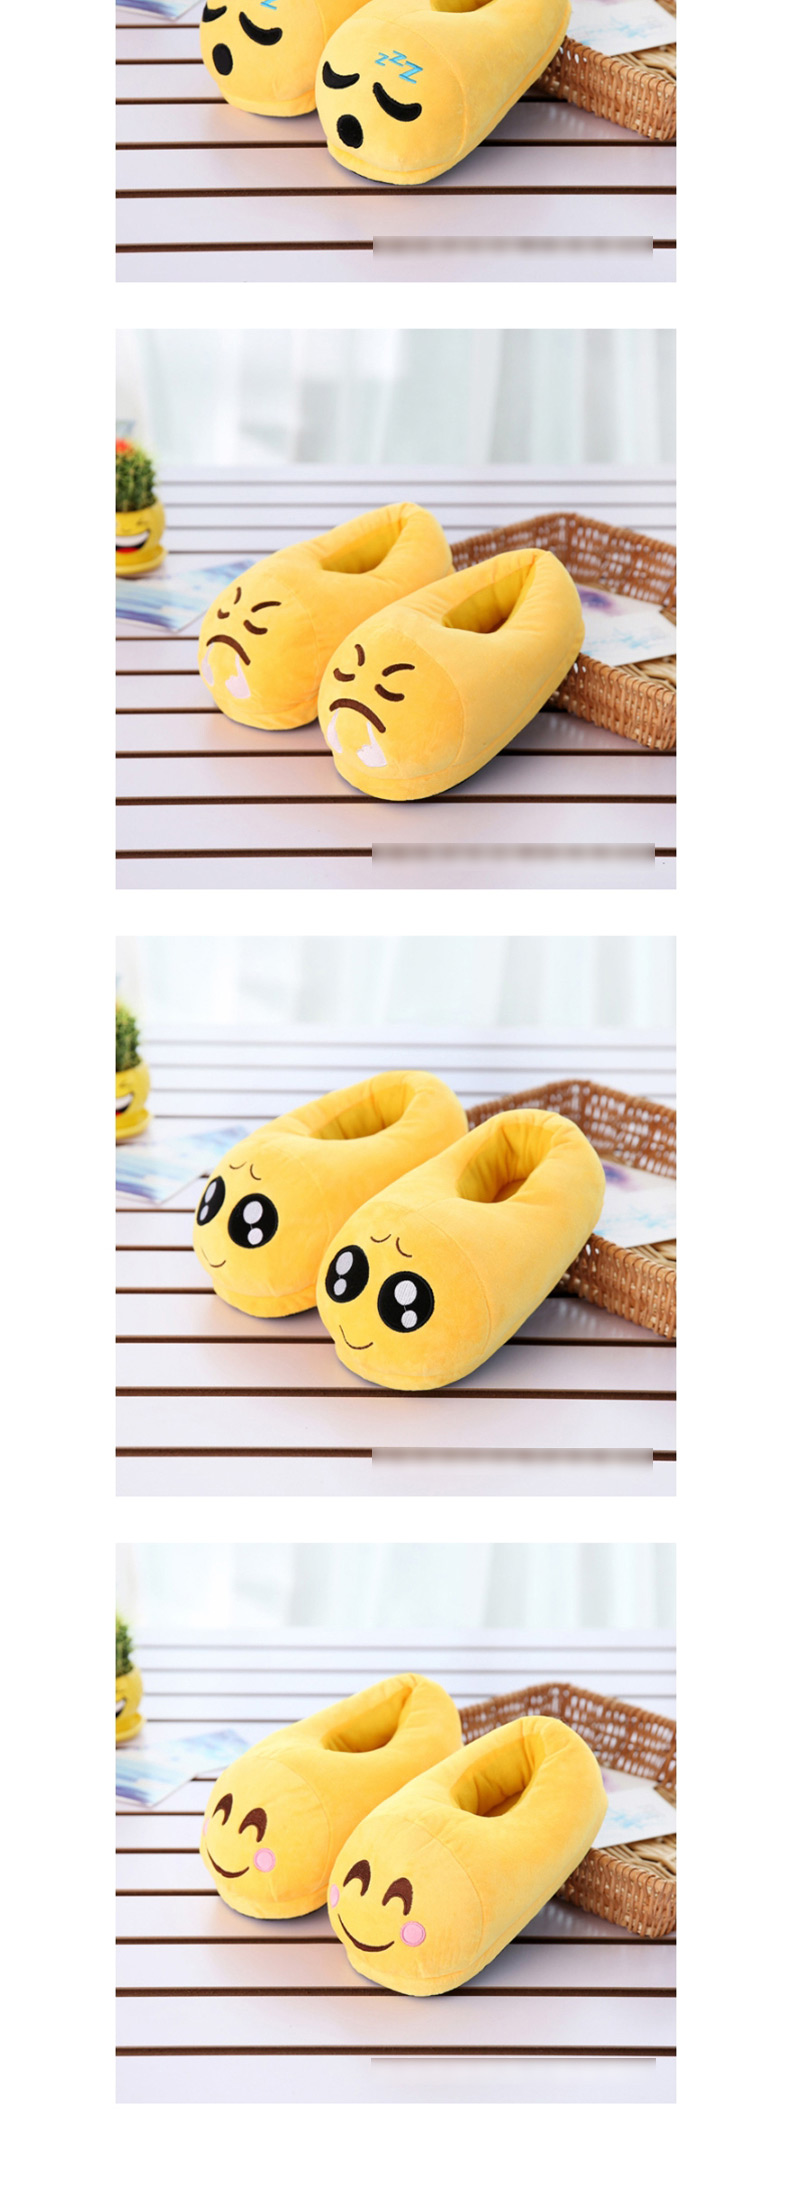 Fashion 16 Yellow Angry Cartoon Expression Plush Bag With Cotton Slippers,Slippers